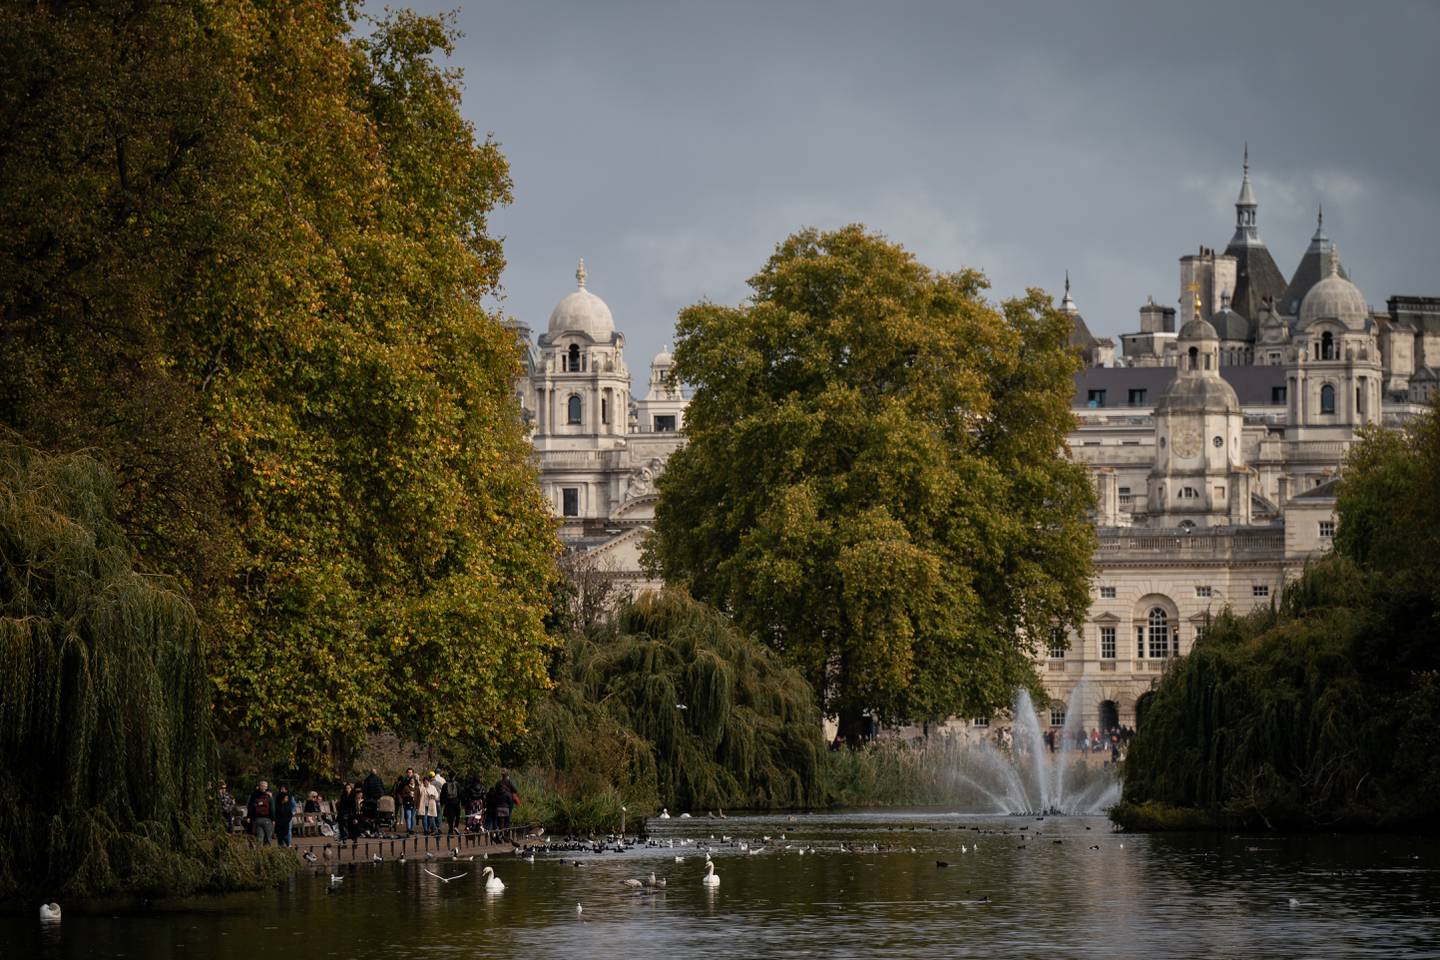 The hotel's outdoor spaces come with views over London's St James's Park, London. PA